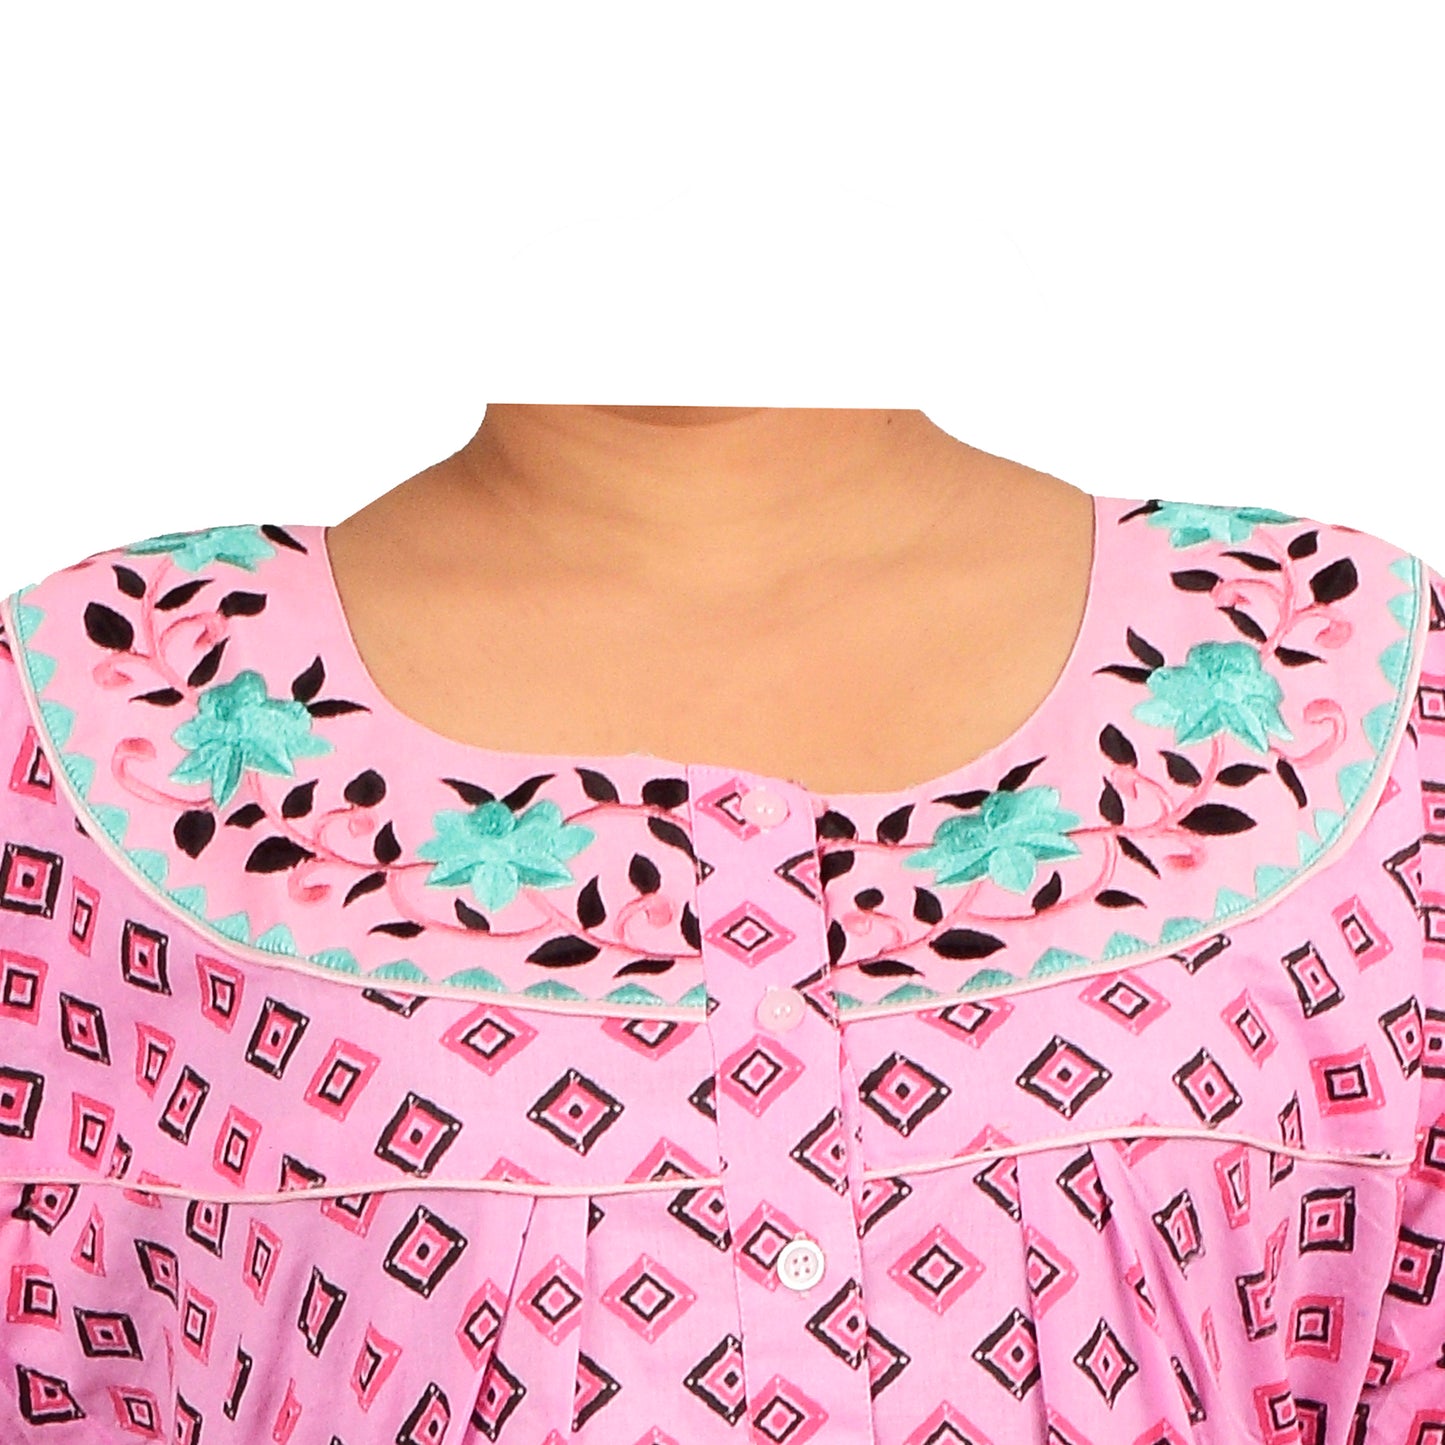 Embroidery Printed Cotton Nighty For Women - Pink